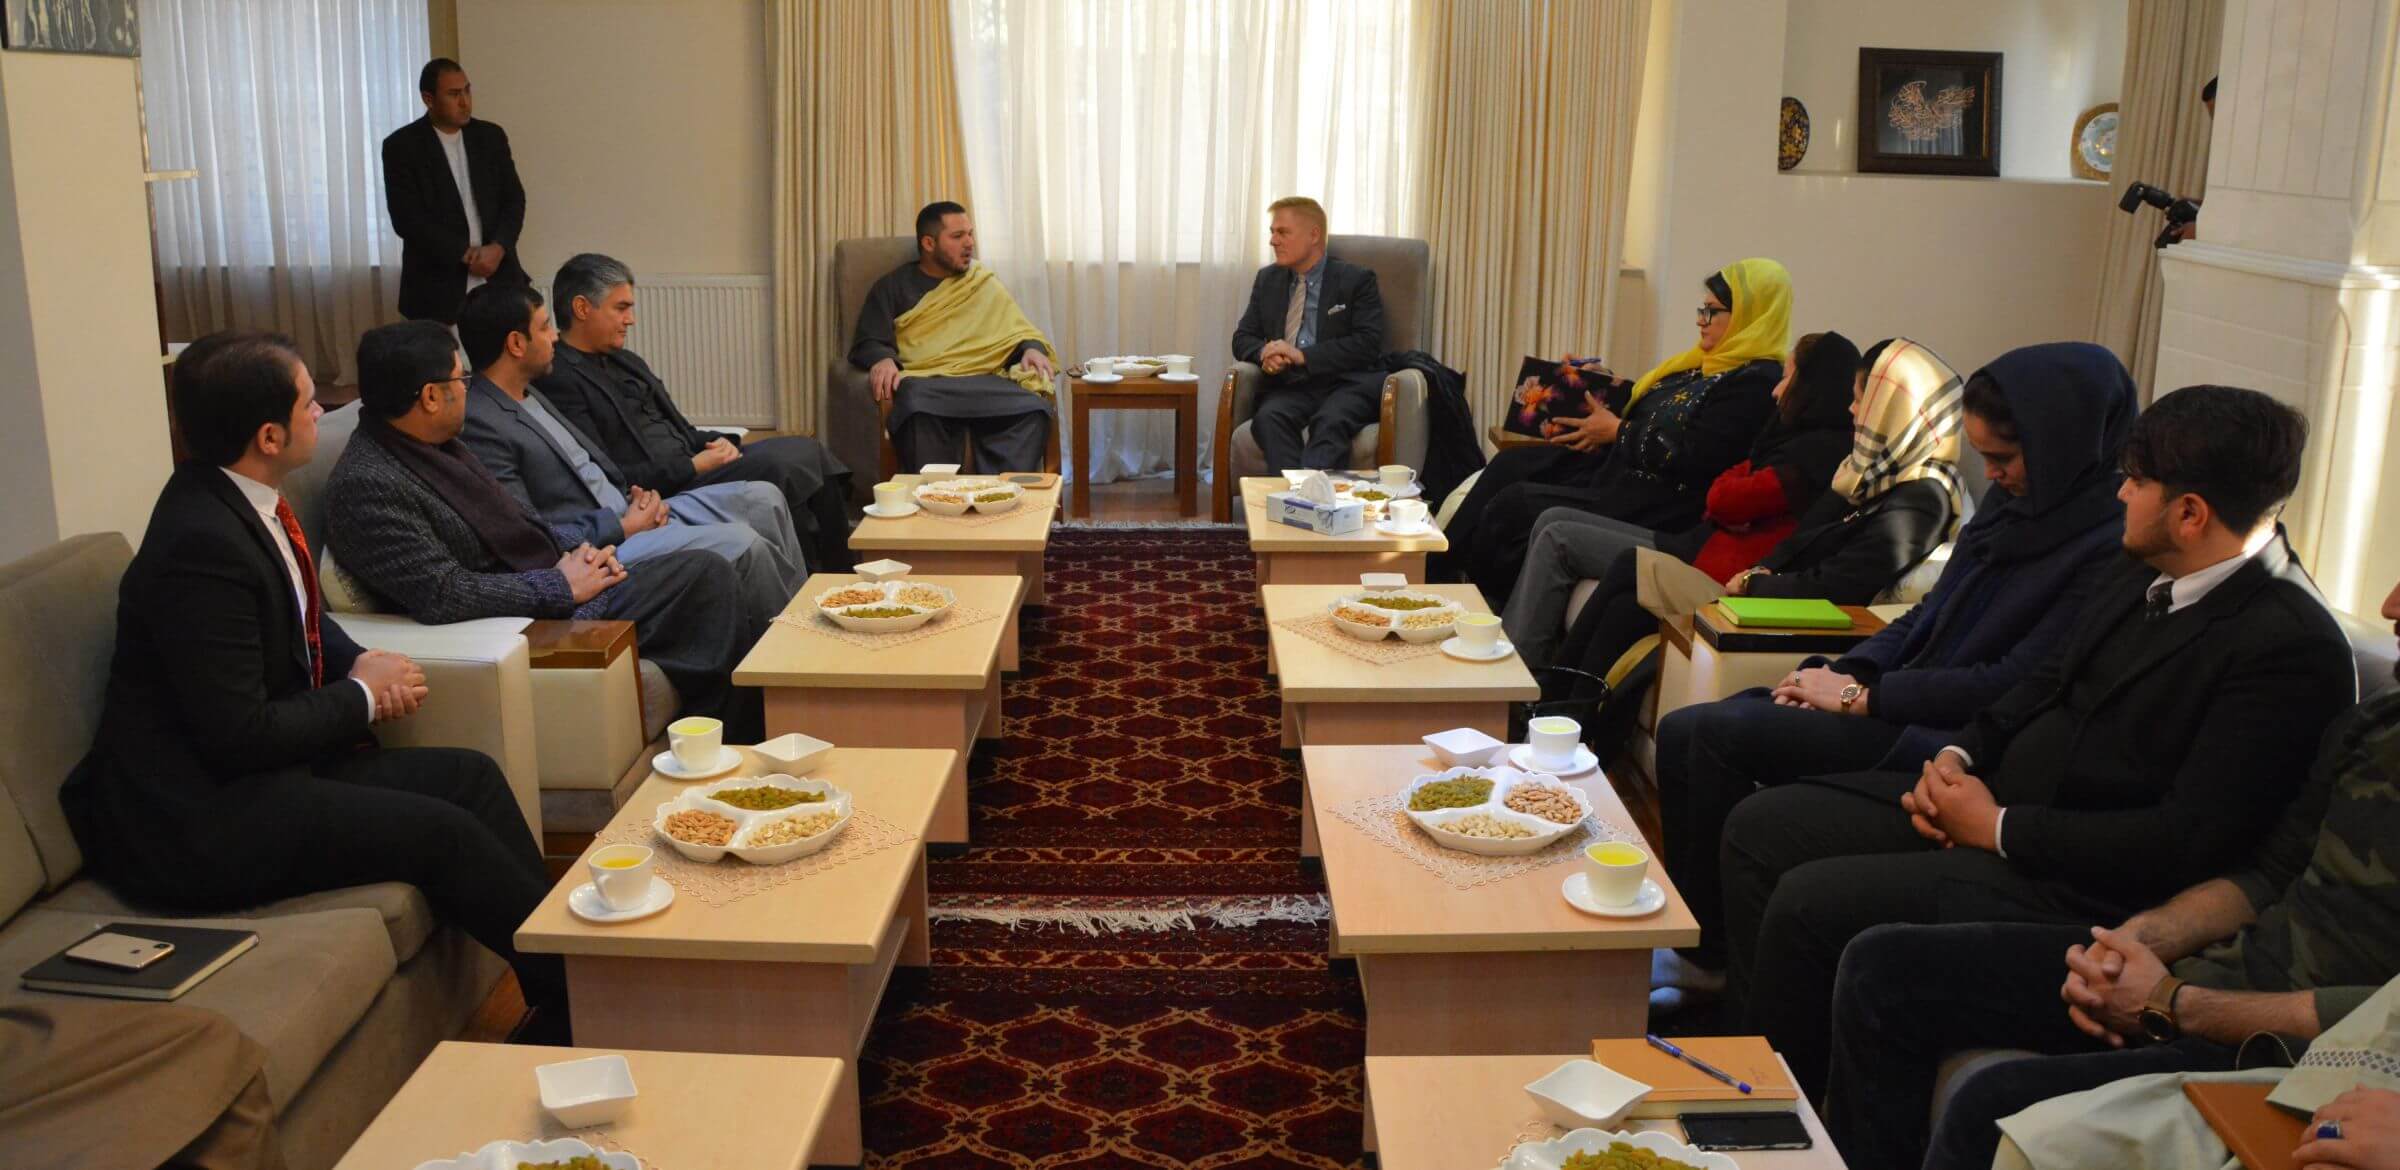 Dr. Tom G. Palmer during a meeting with H.E Sayed Khalilullah Anwari and a few members of Afghanistan Parliament